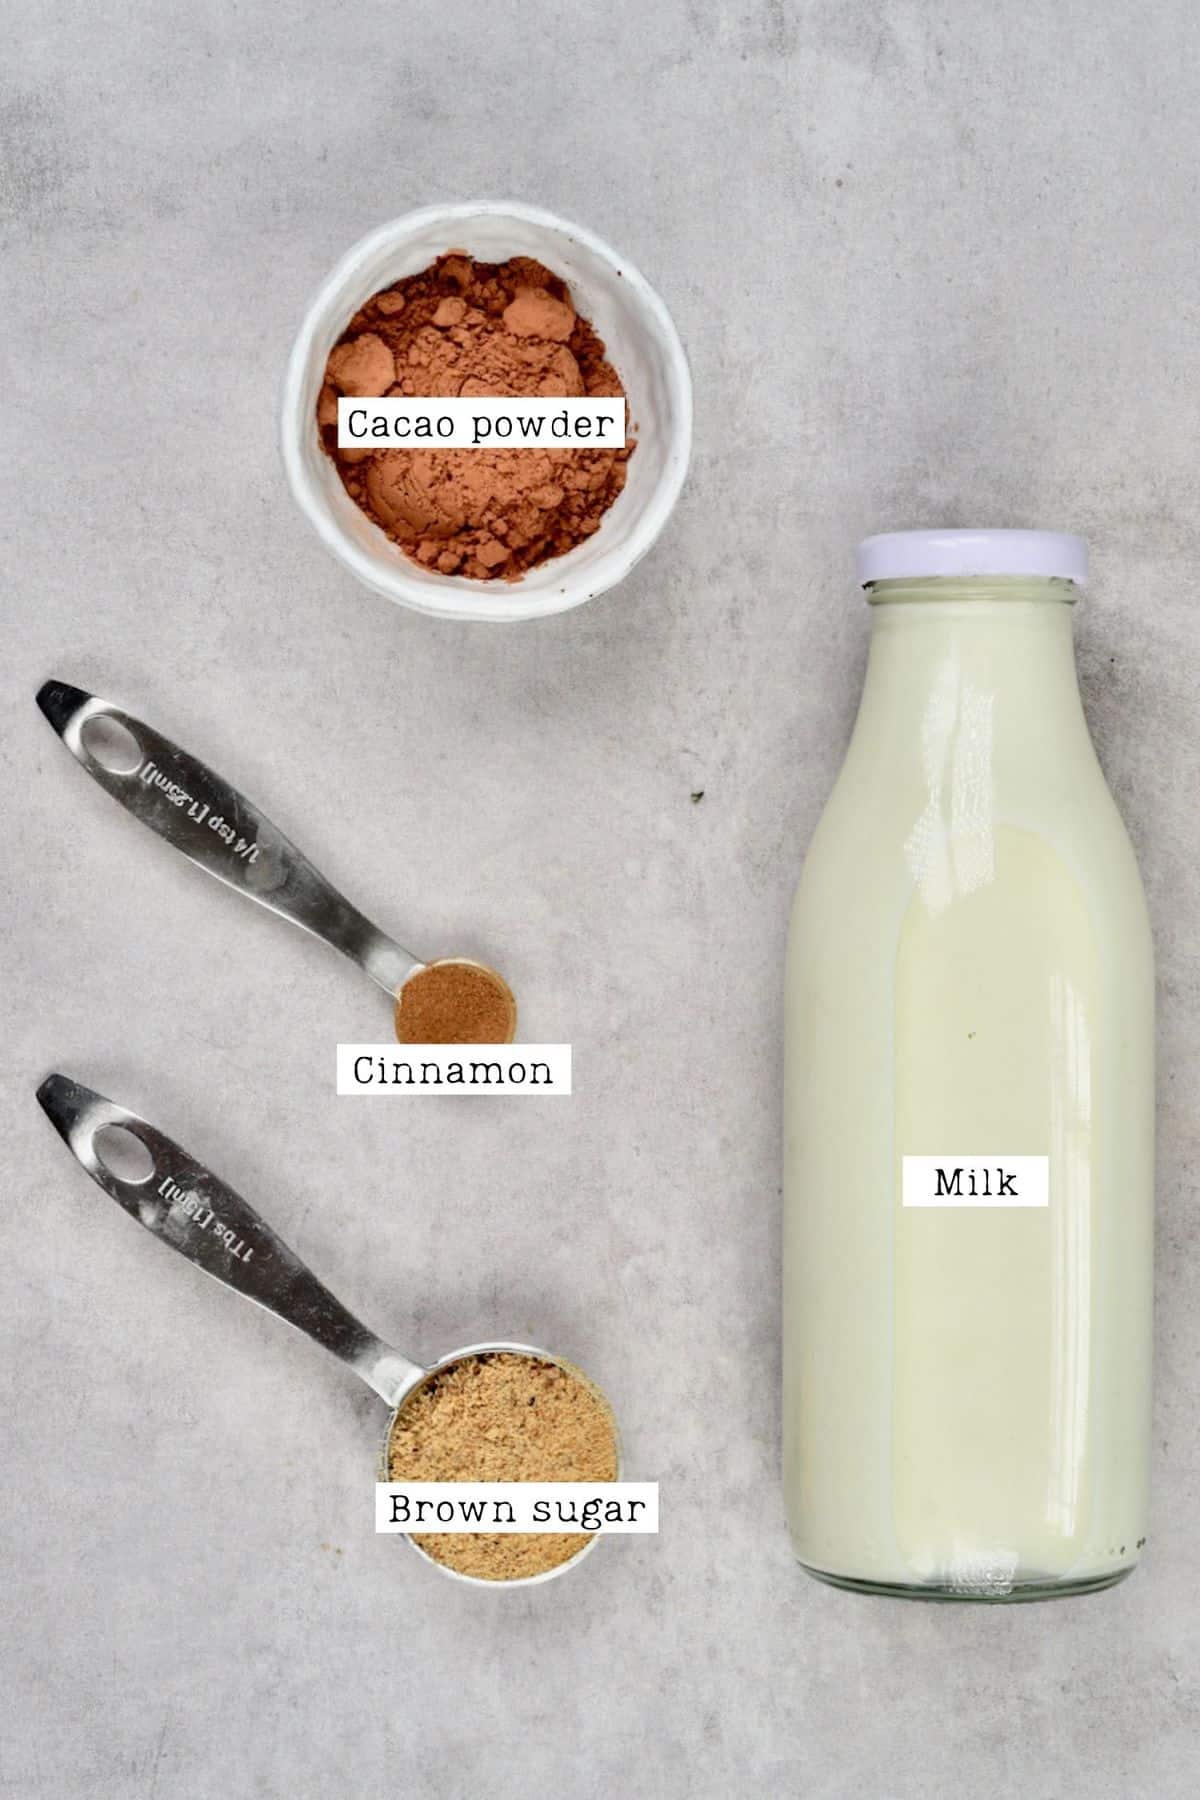 Hot chocolate Ingredients